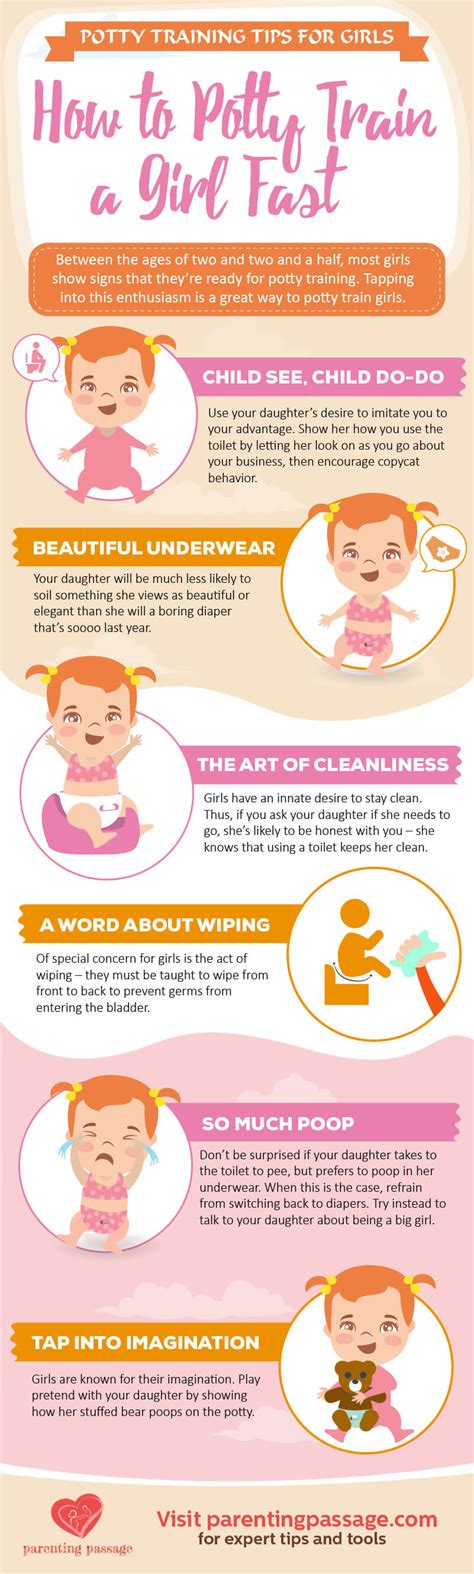 How To Potty Train A Girl Infographic